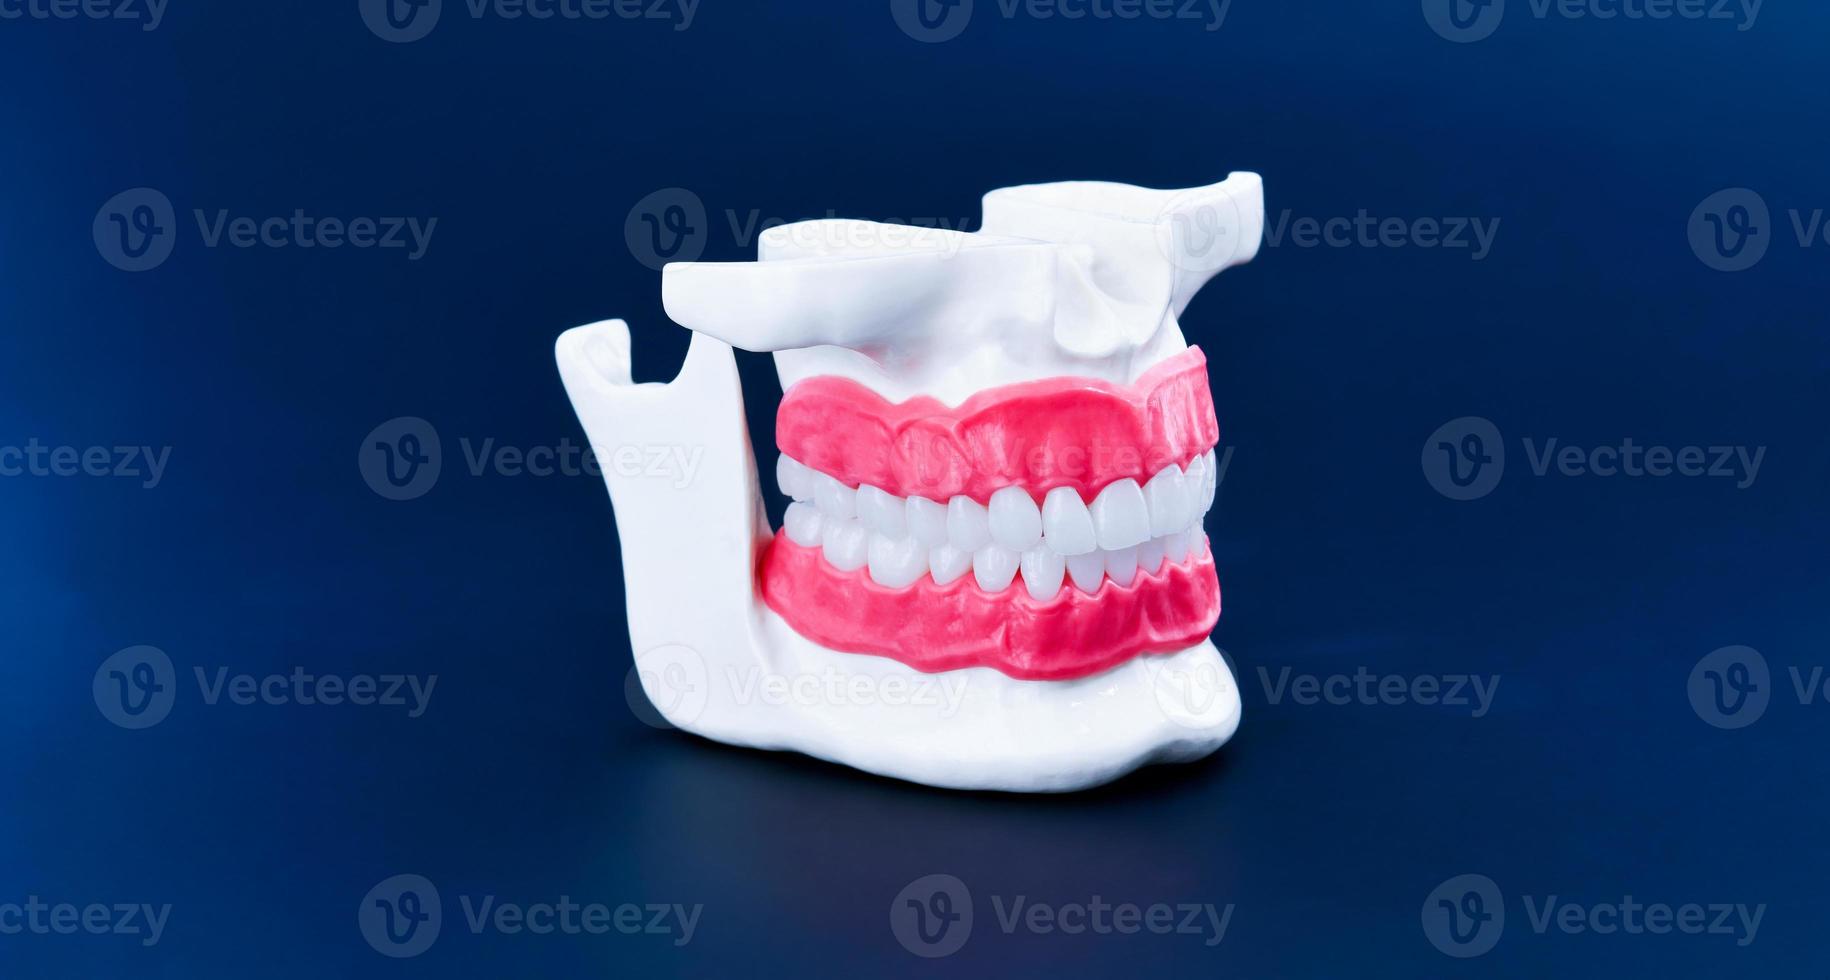 Human jaw with teeth and gums anatomy model photo